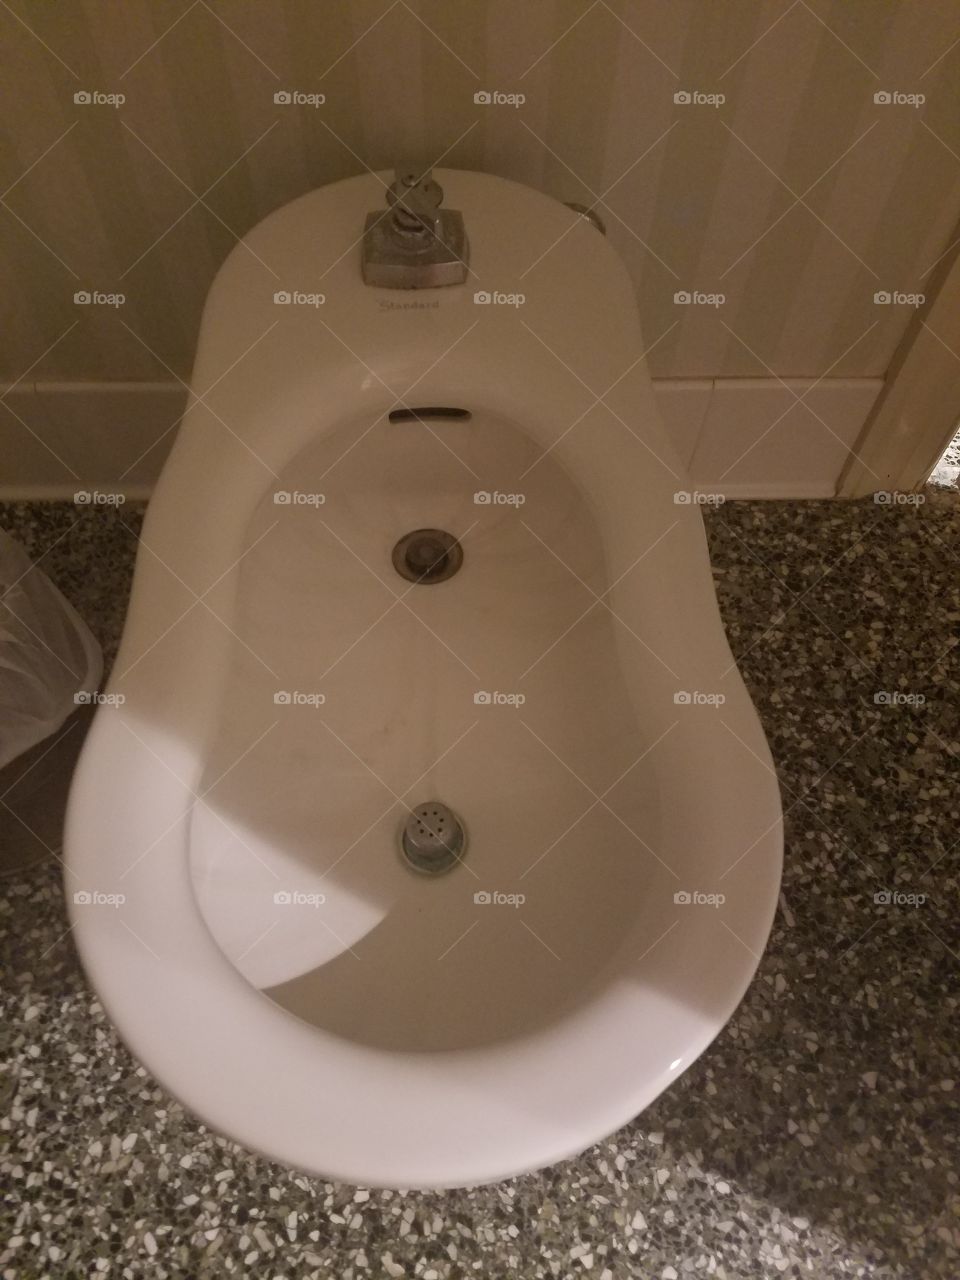 so this is what a bidet looks like